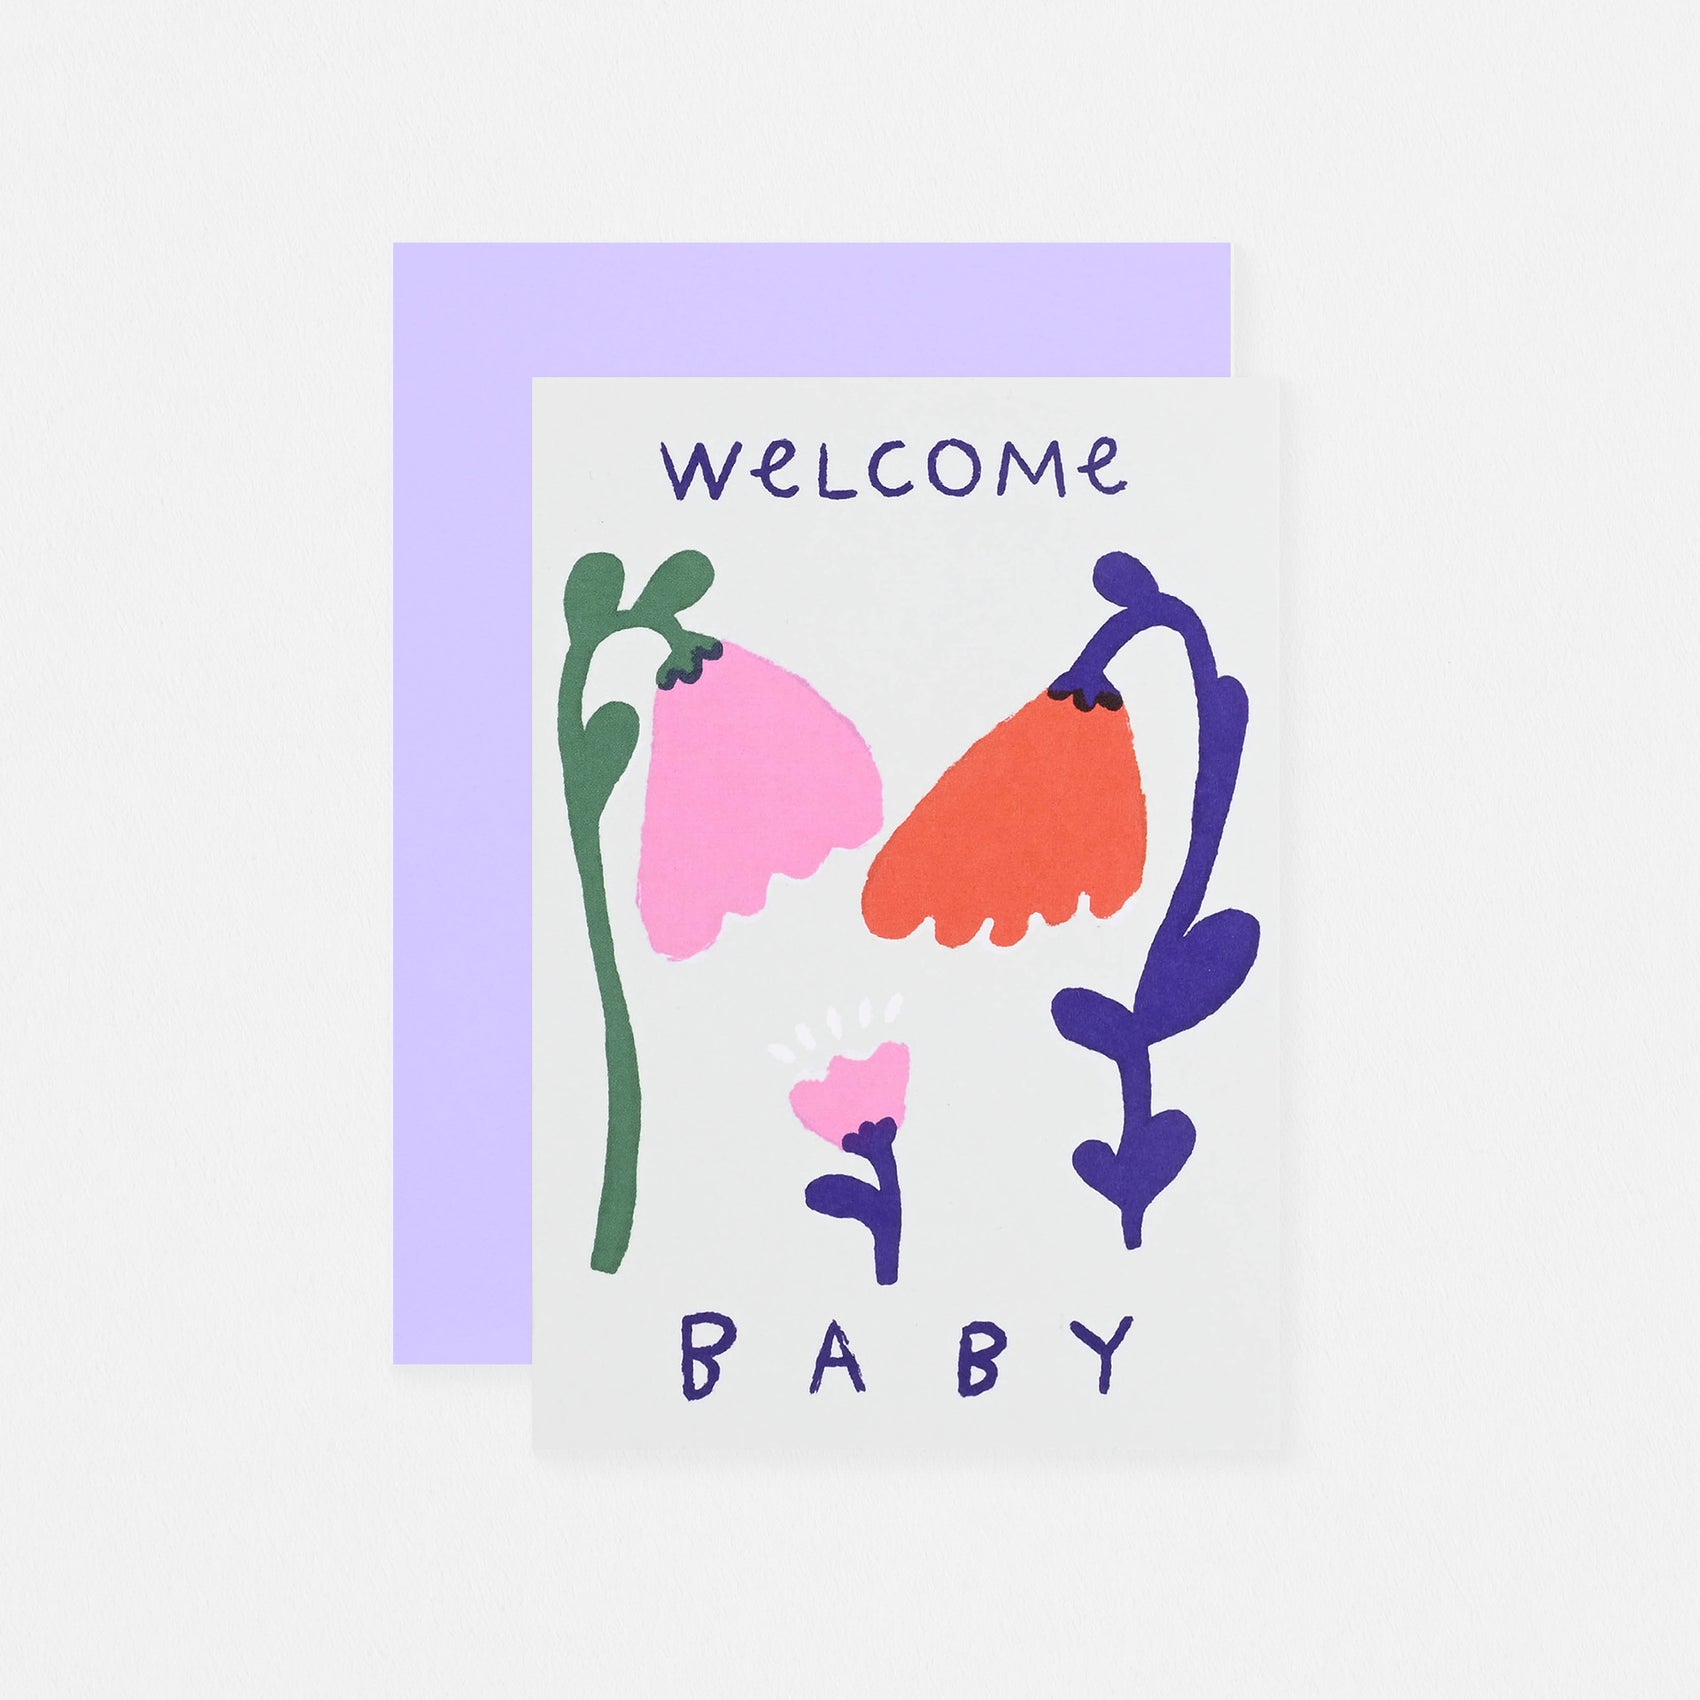 Welcome Baby Greeting Card